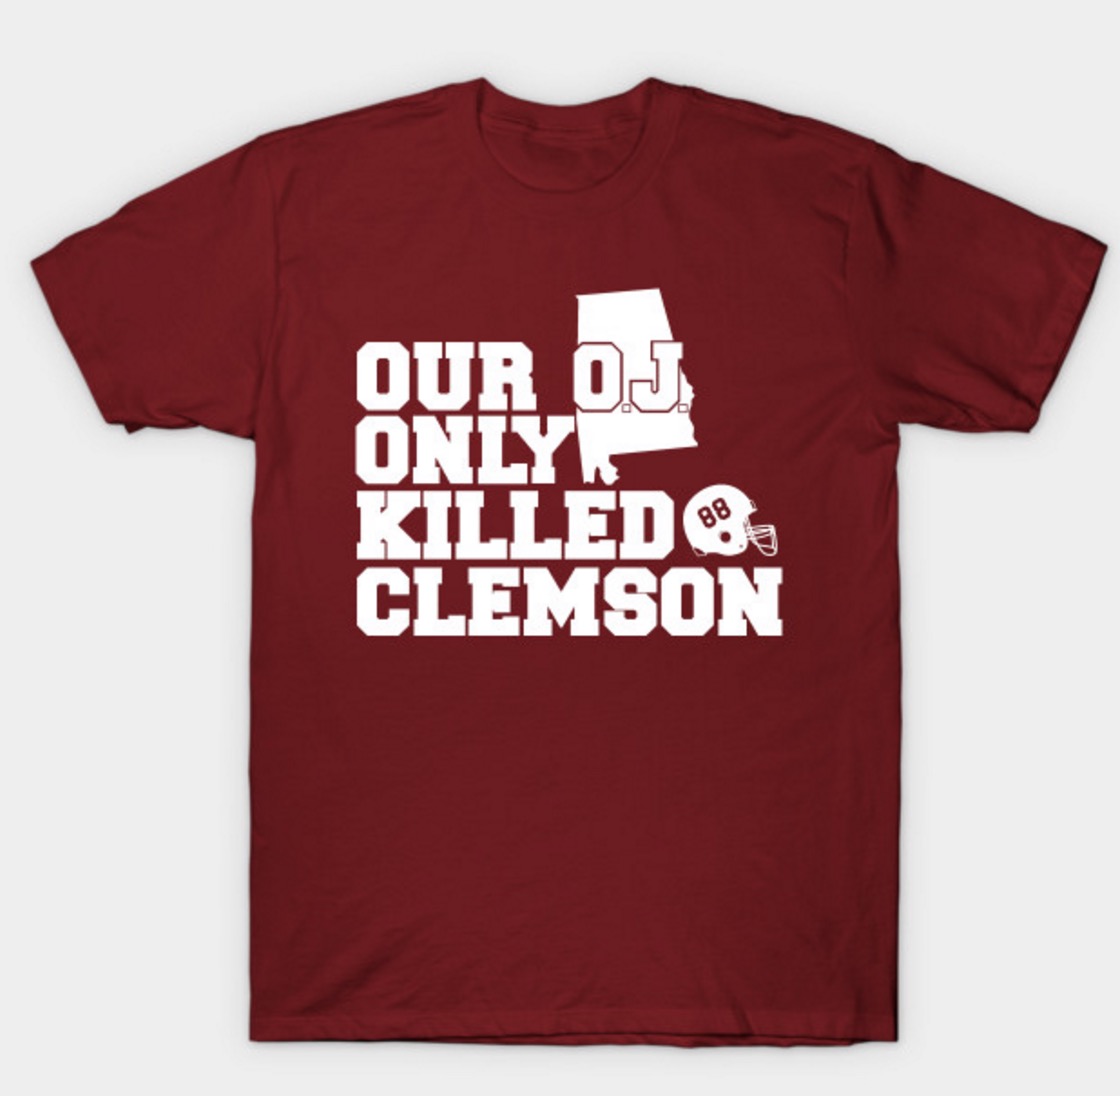 Alabama fans could be sporting highly questionable t-shirts about O.J ...